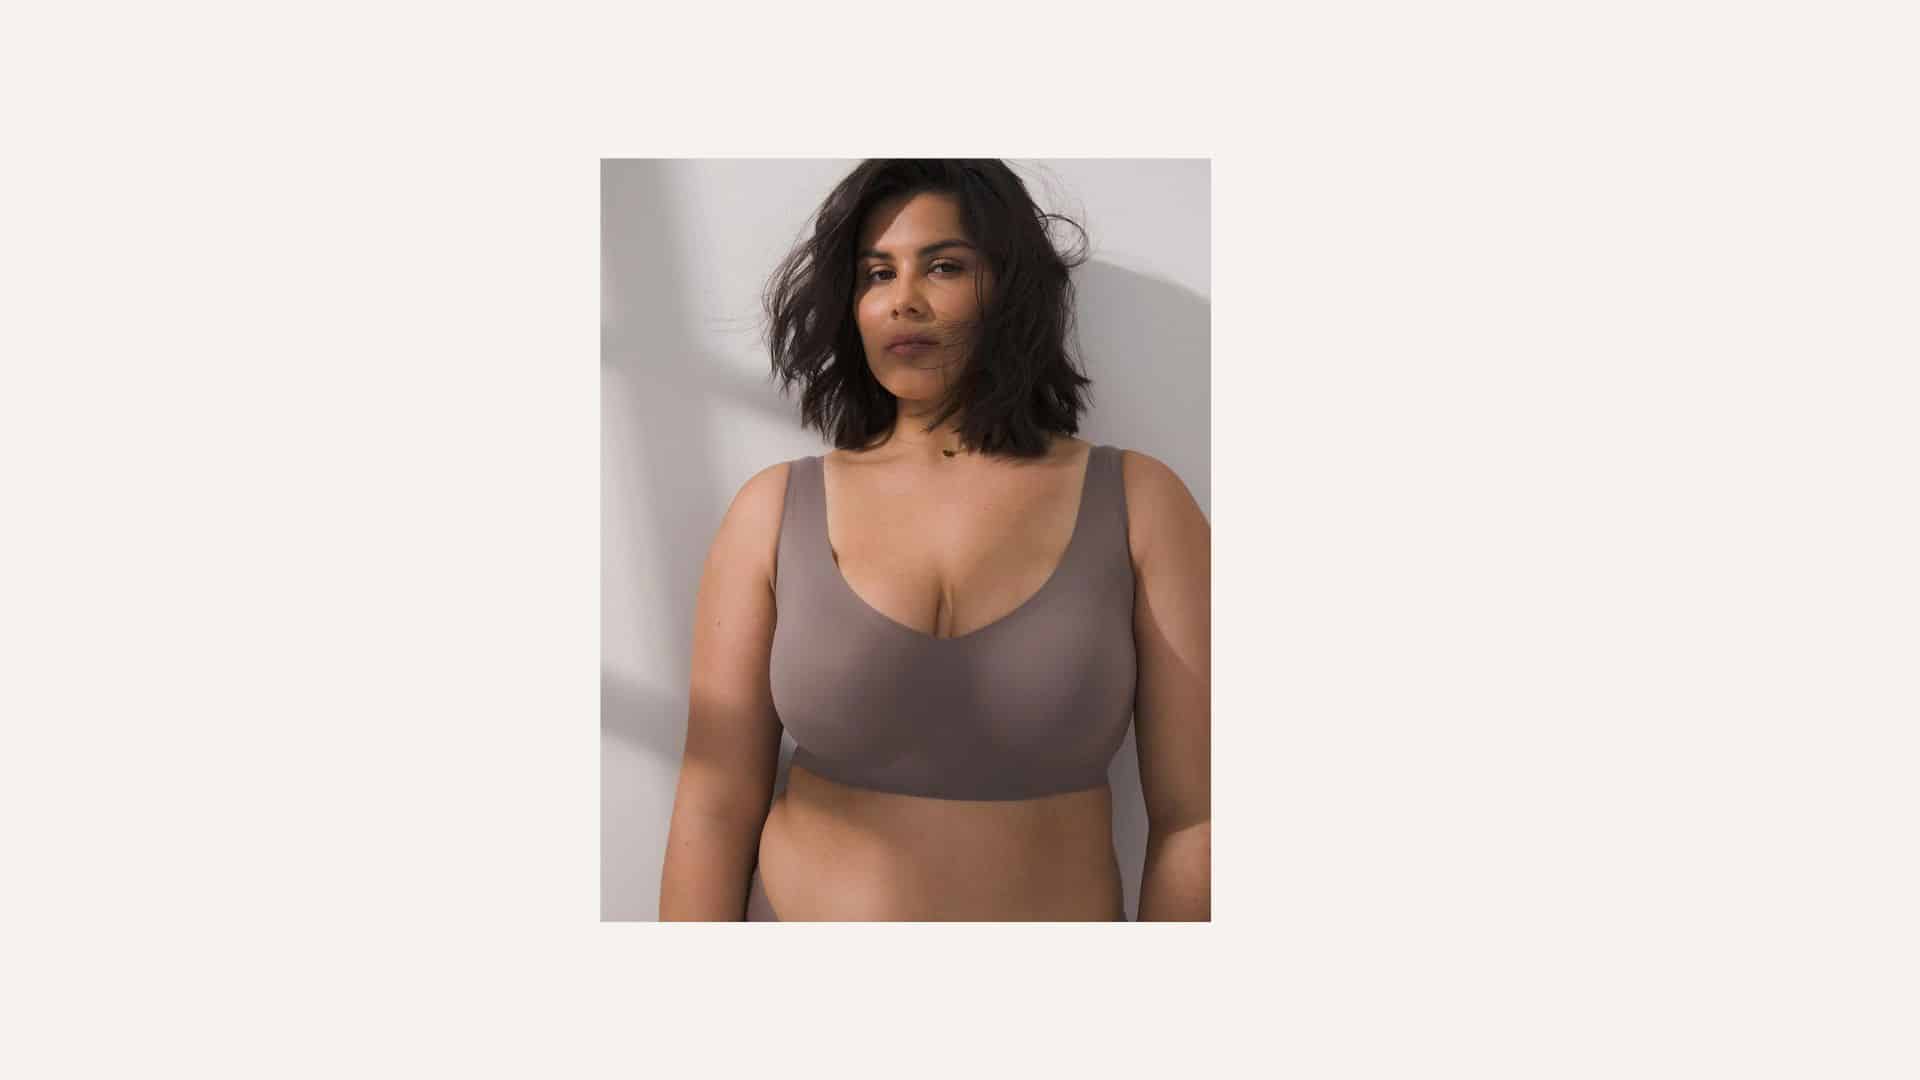 I hate bras but found an alternative that's a 'hug for your boobs